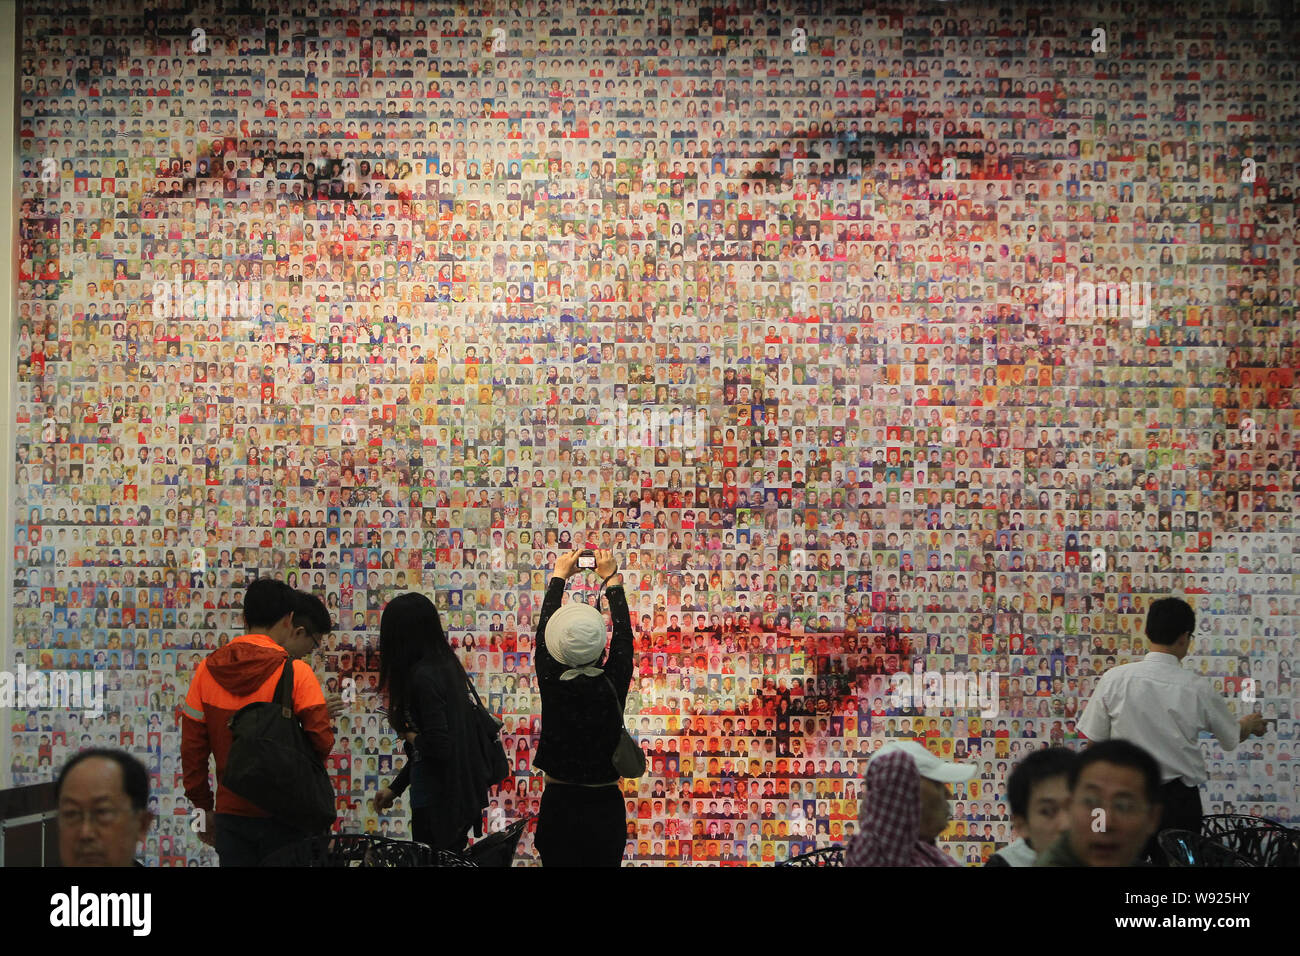 Visitors look at or take pictures of a wall of a smiling face consisting of thousands of photos at the Shanghai Film Museum in Shanghai, China, 13 Jun Stock Photo